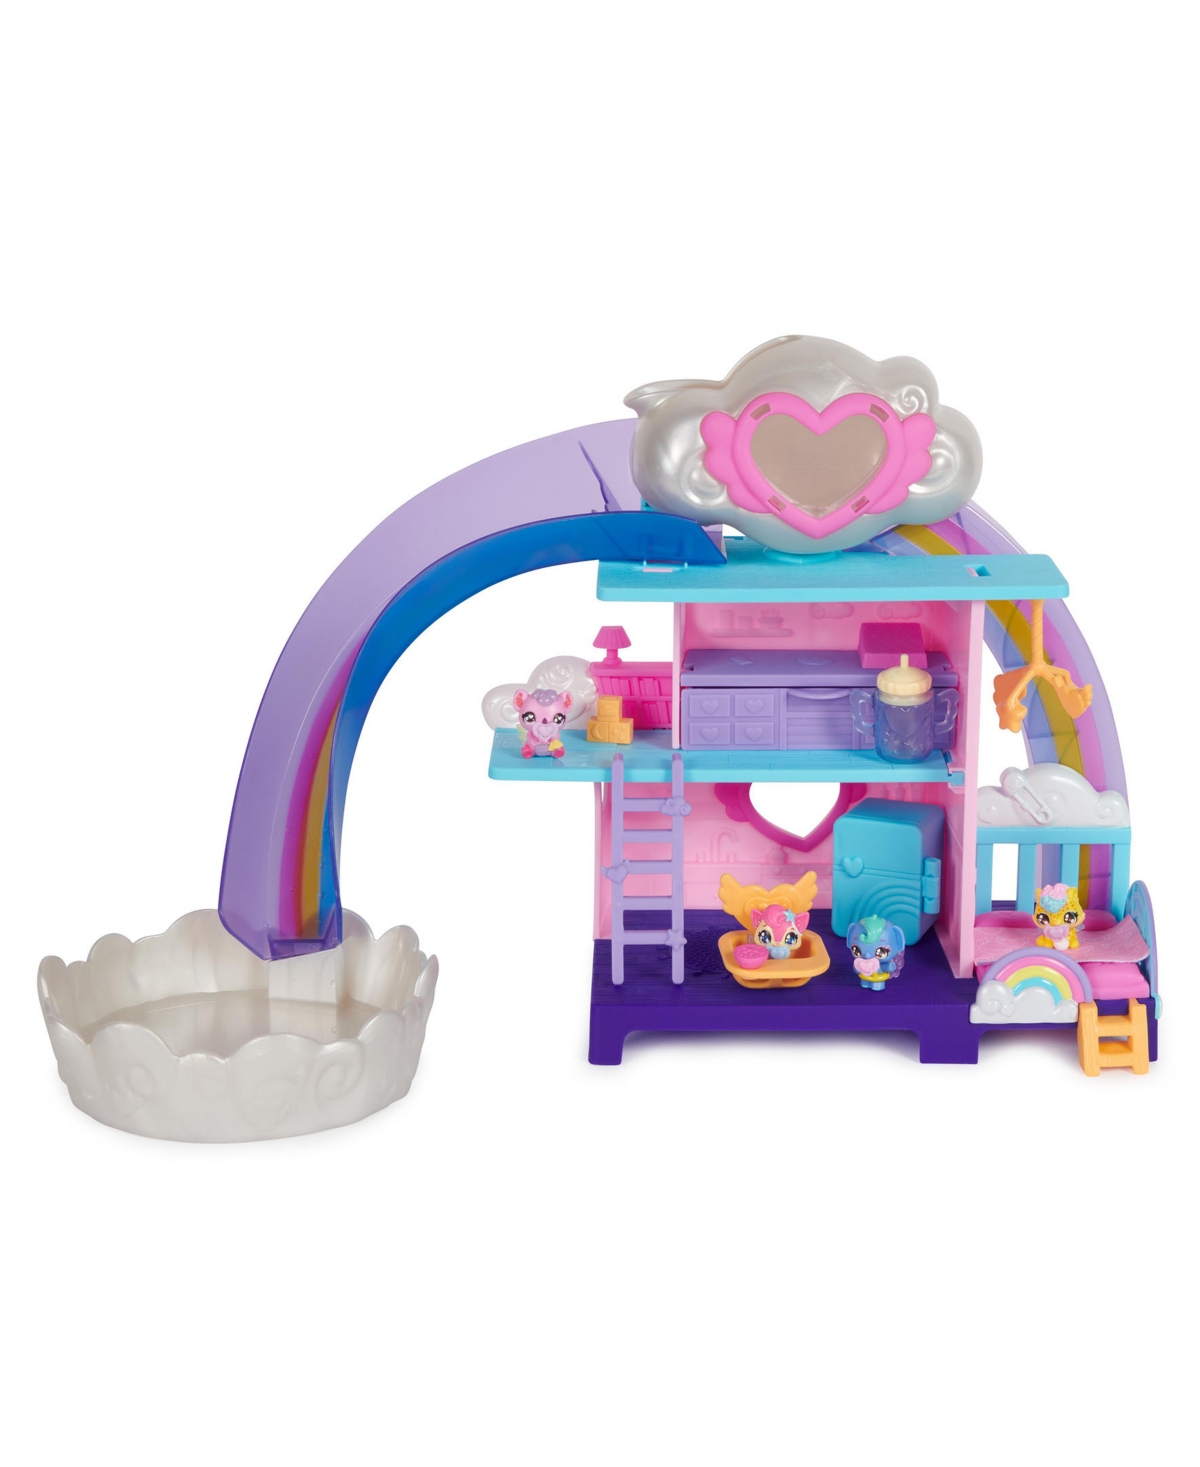 Hatchimals Alive Hatchi-nursery Playset With 4 Mini Figures In Self-hatching Eggs In Multi-color